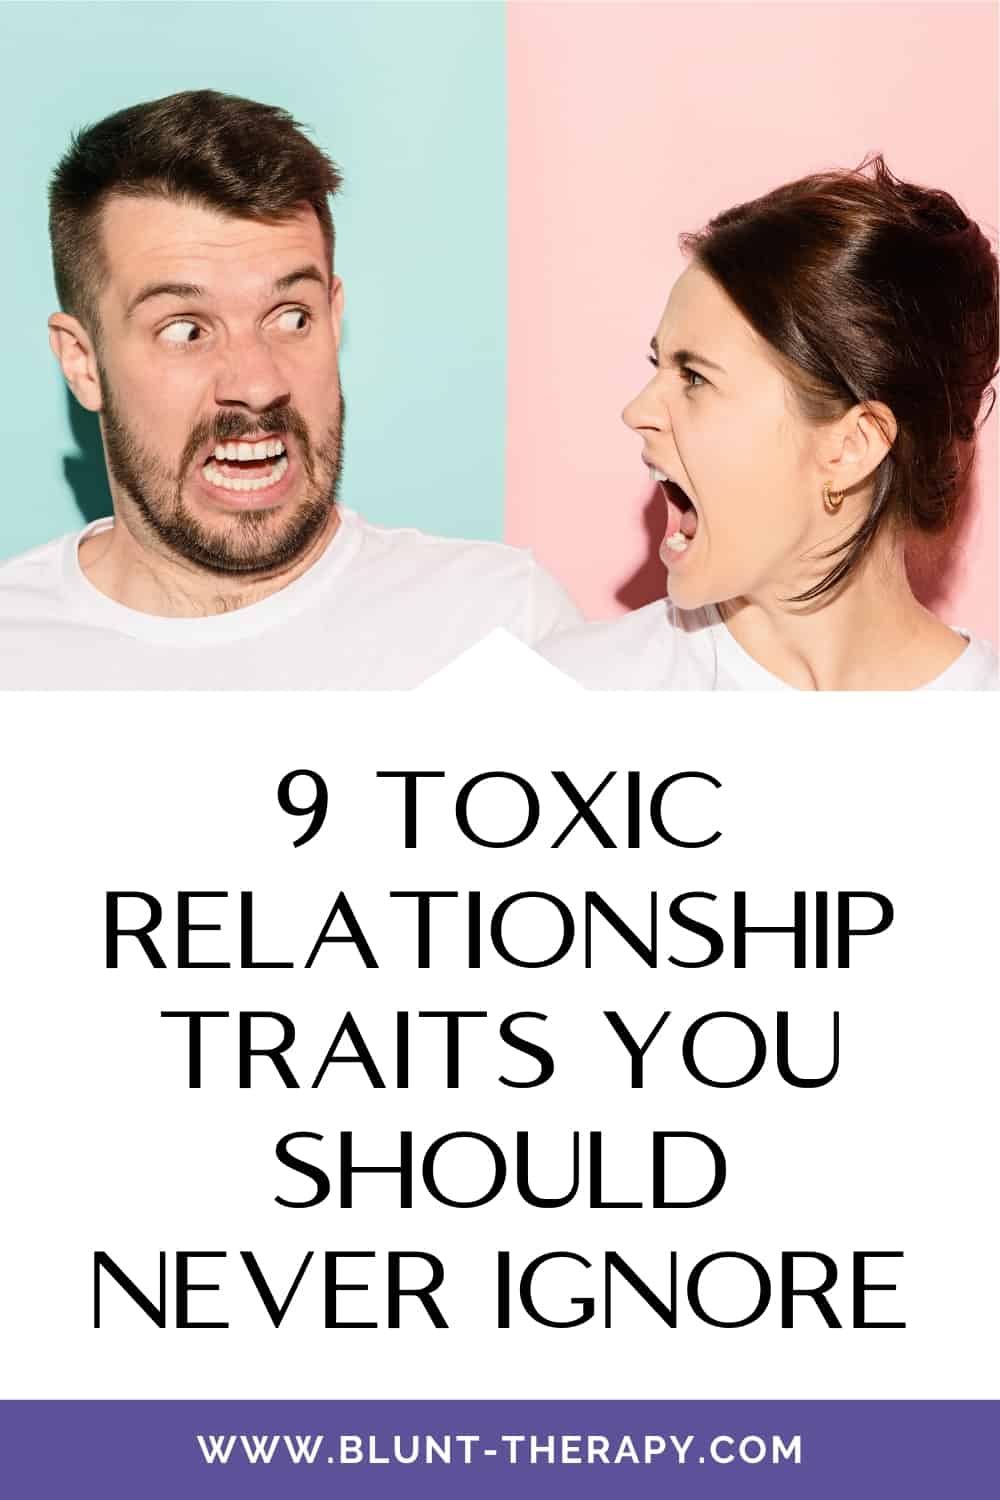 9 Toxic Relationship Traits You Should Never Ignore